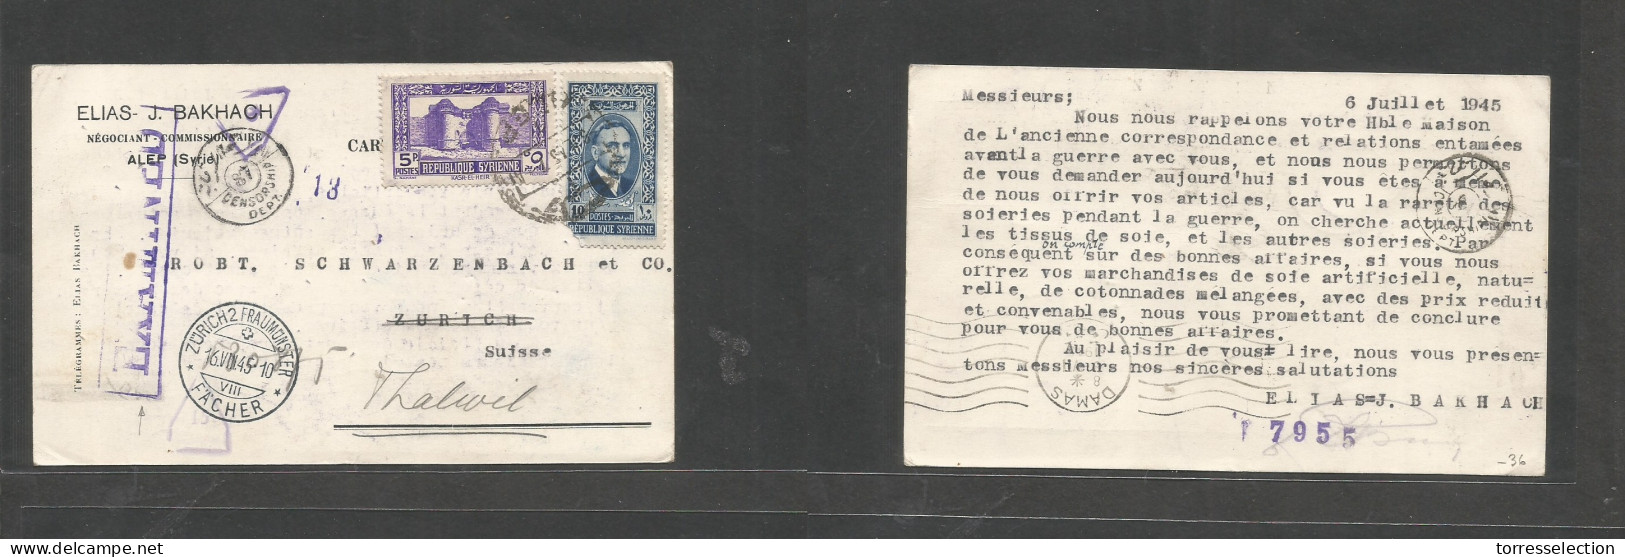 SYRIA. 1945 (5 July) Alep - Switzerland, Thalwil Via Zurich (16 Aug) Comercial Private Multifkd Card At 15p Rate, Cds Wi - Syrie